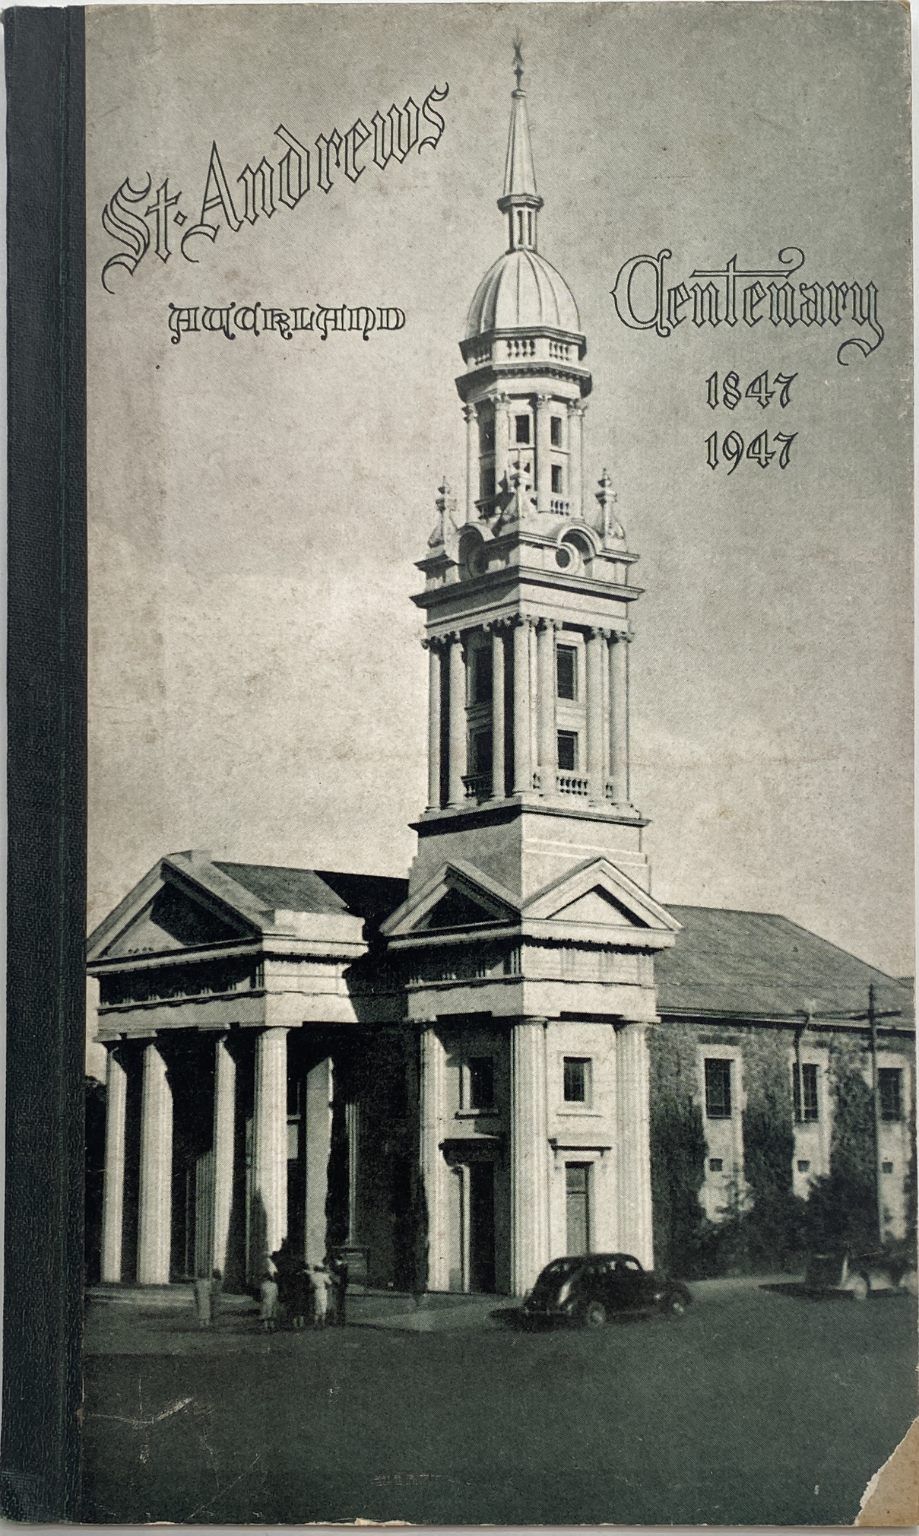 THE HISTORY OF ST ANDREWS: Pioneer Presbyterian Church of Auckland 1847 - 1947